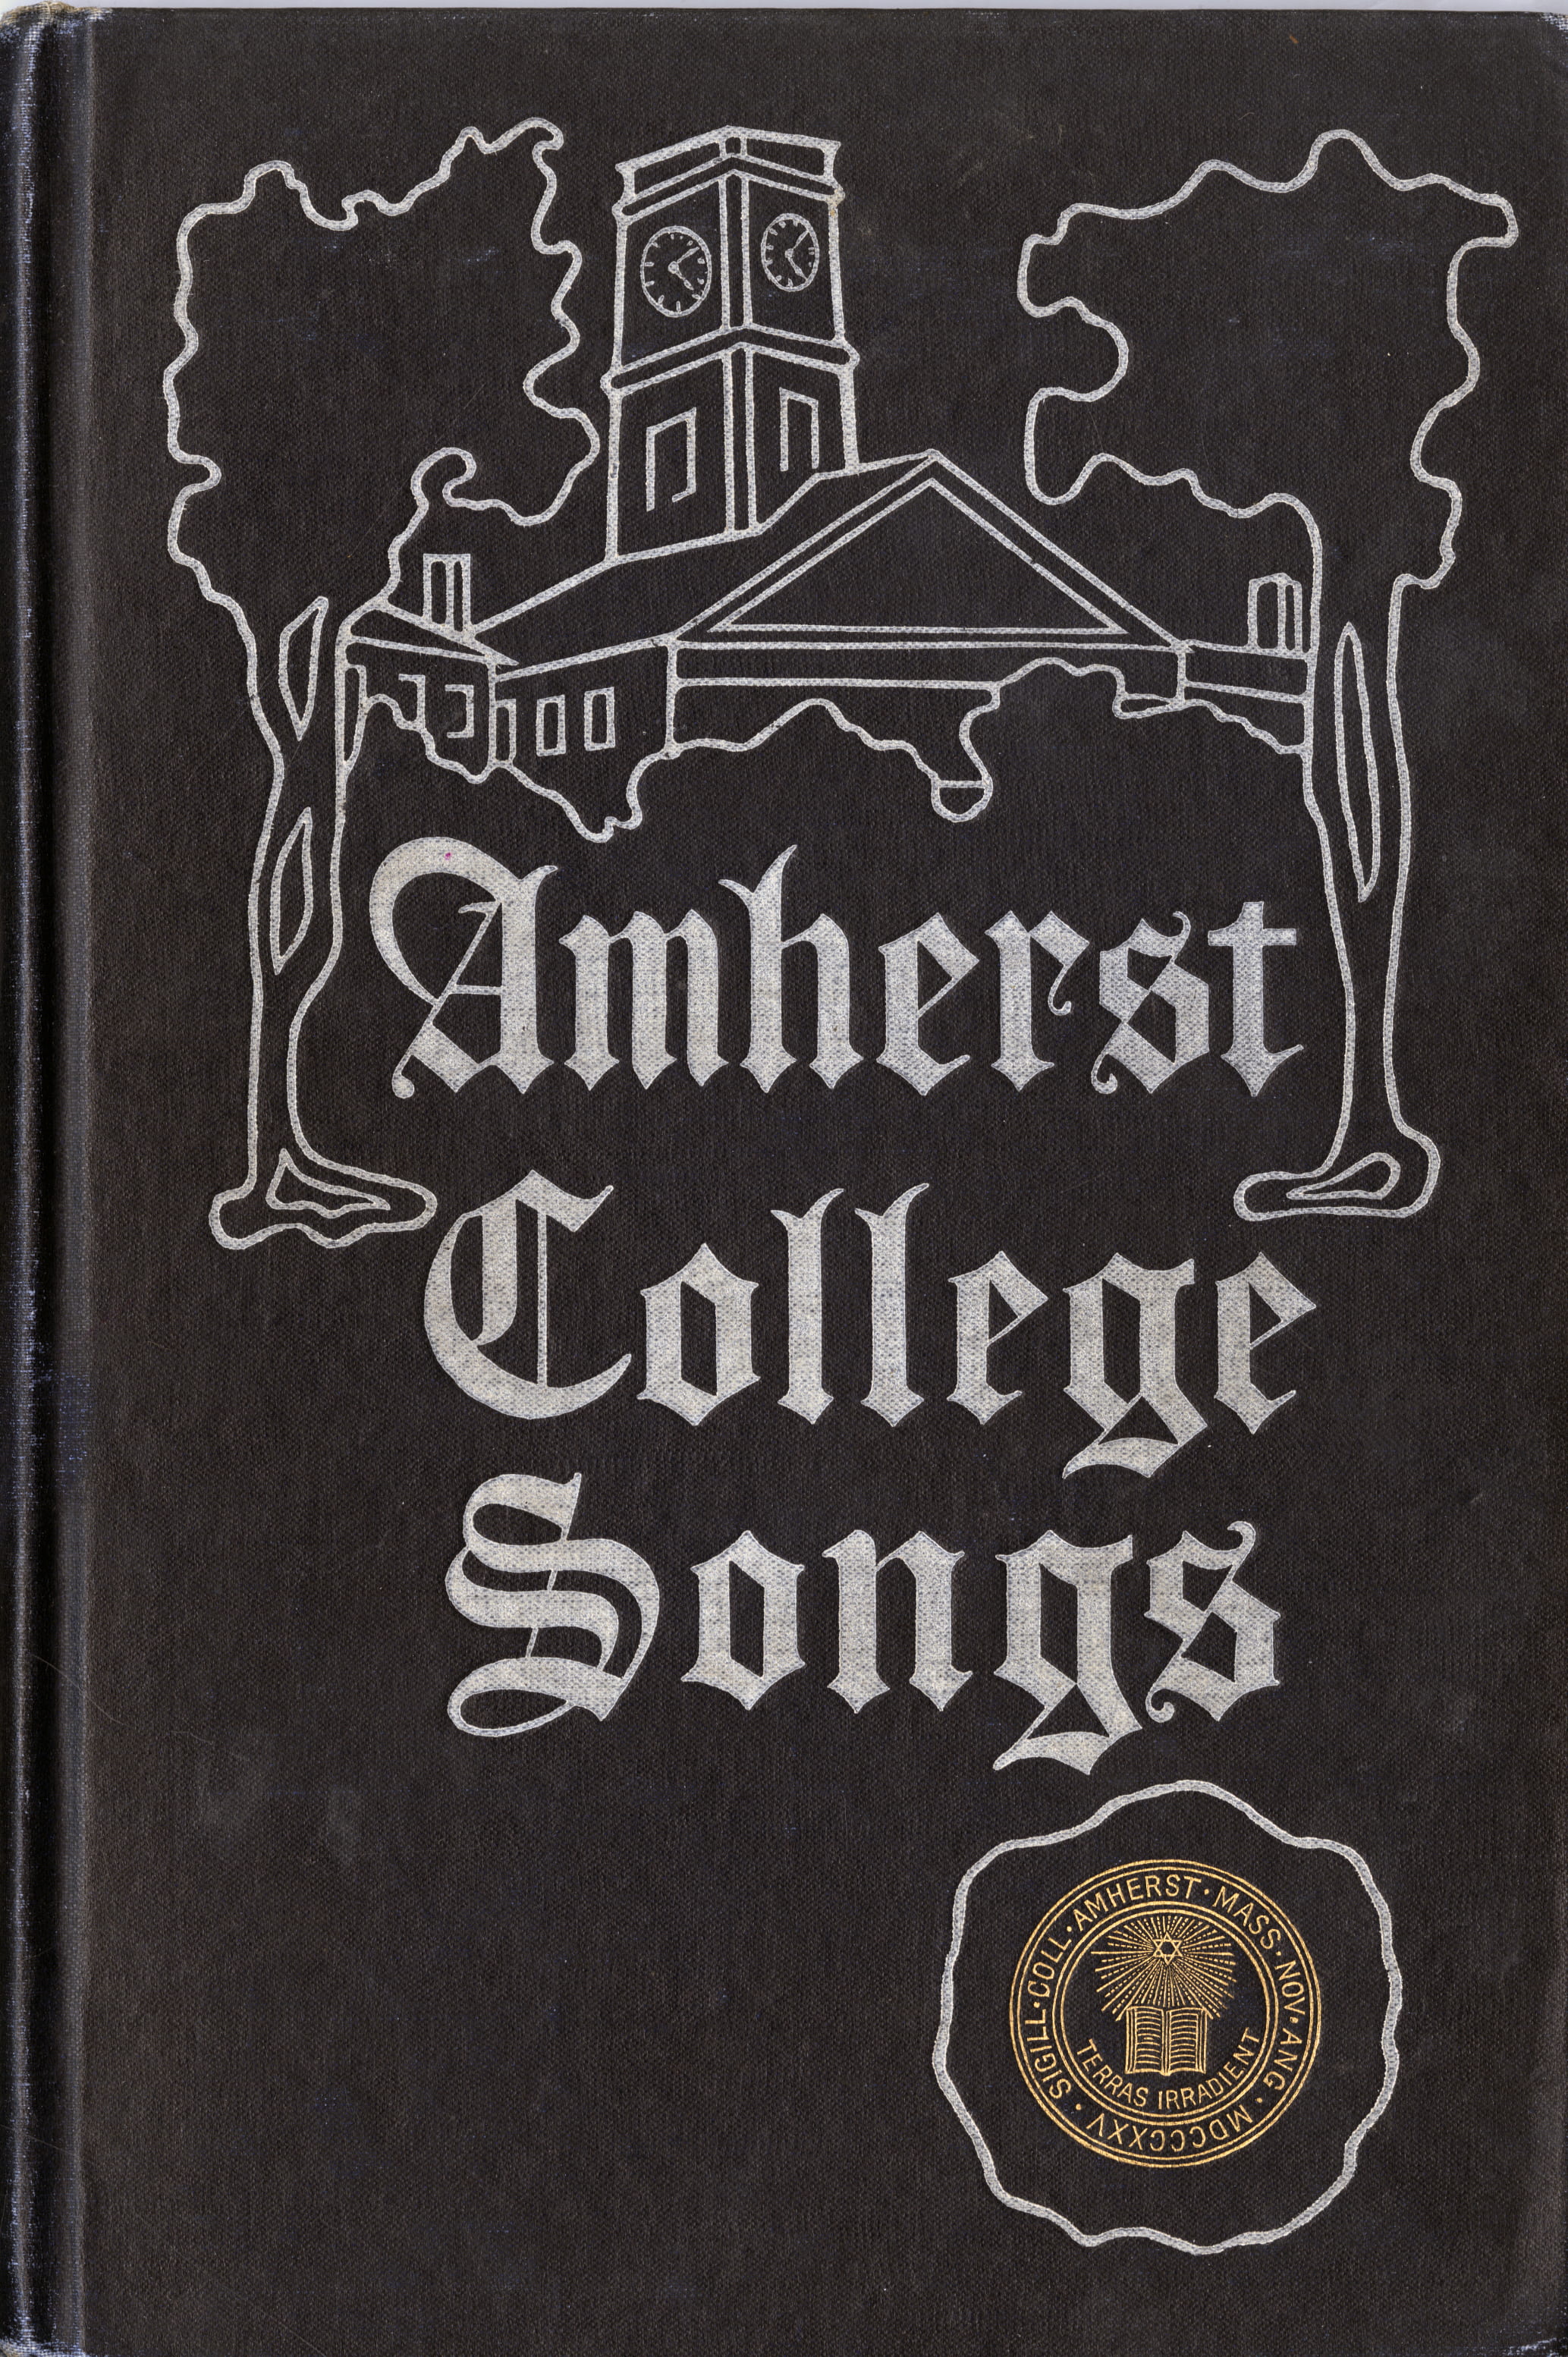 Amherst College Songs (1906)